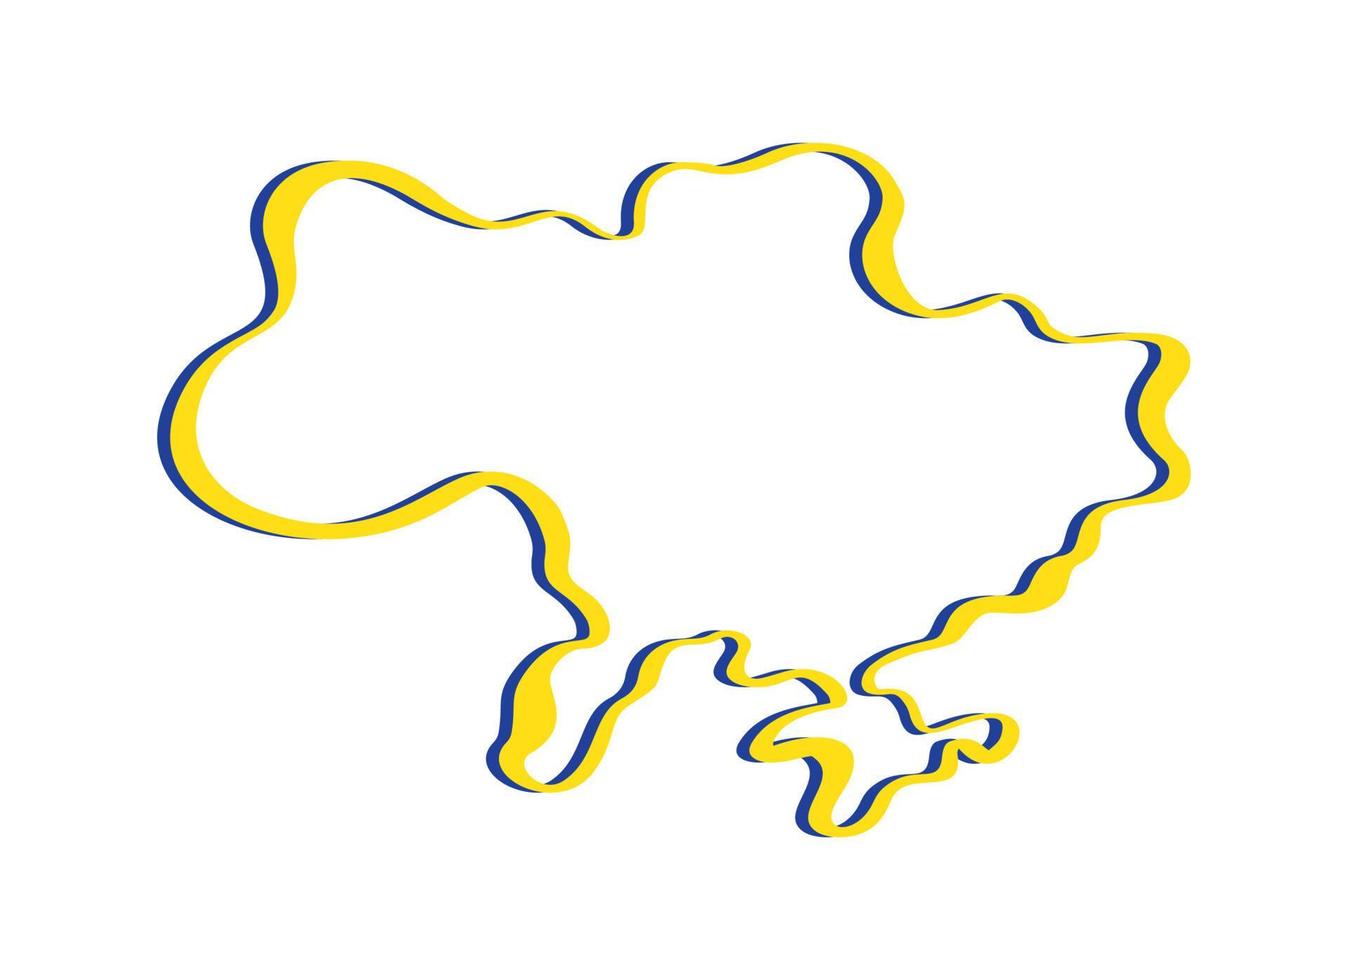 Line art vector map of Ukraine with blue and yellow brush stroke. Save Ukraine. Design element for sticker, banner, poster, card. Isolated illustration